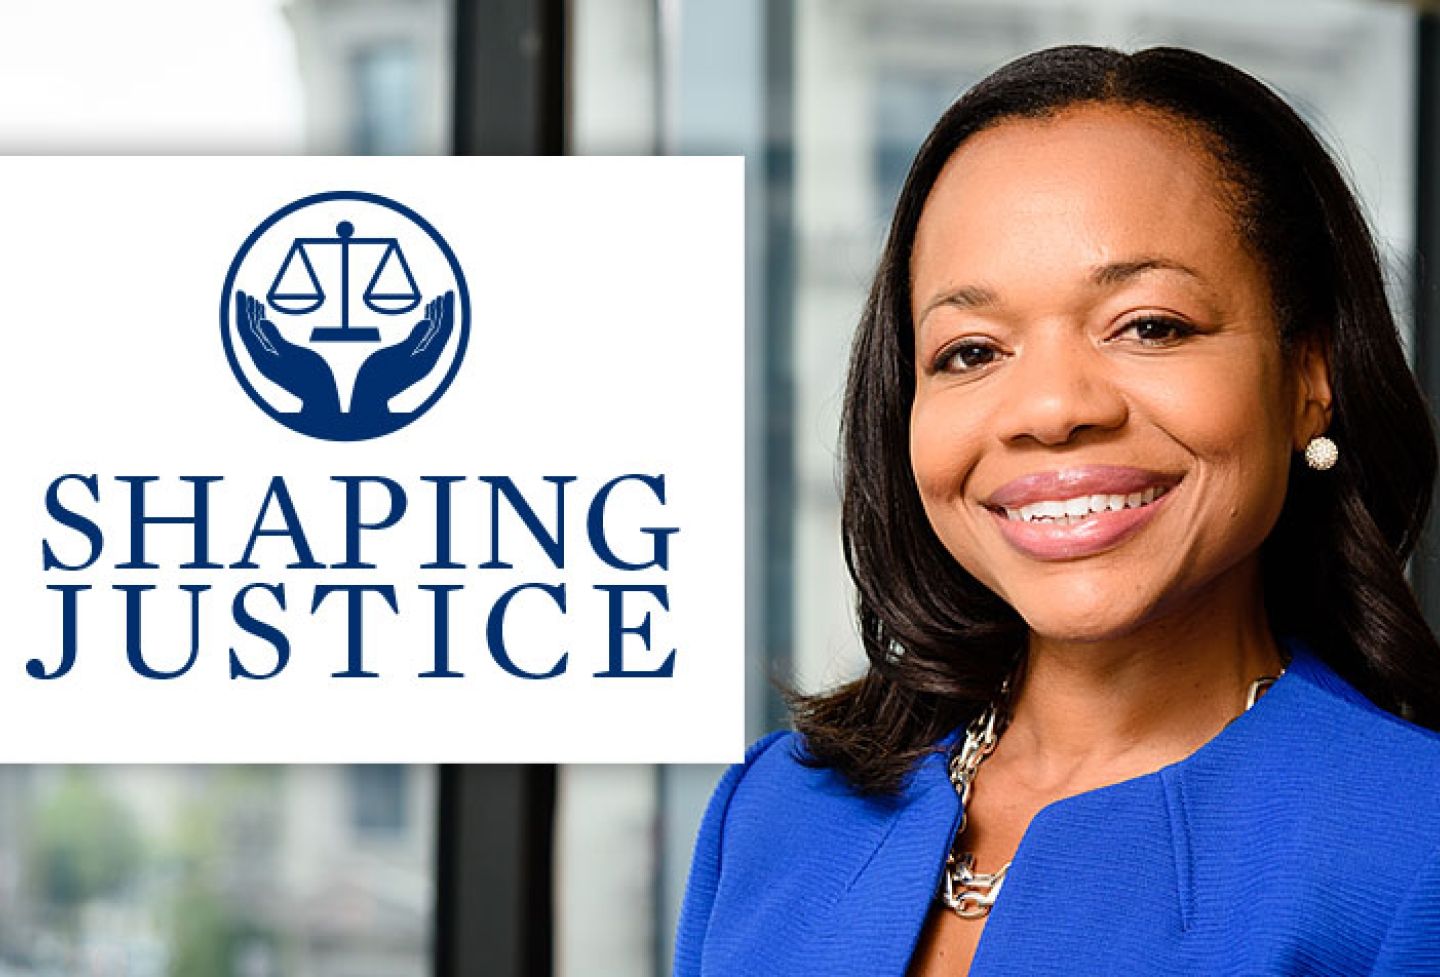 Shaping Justice